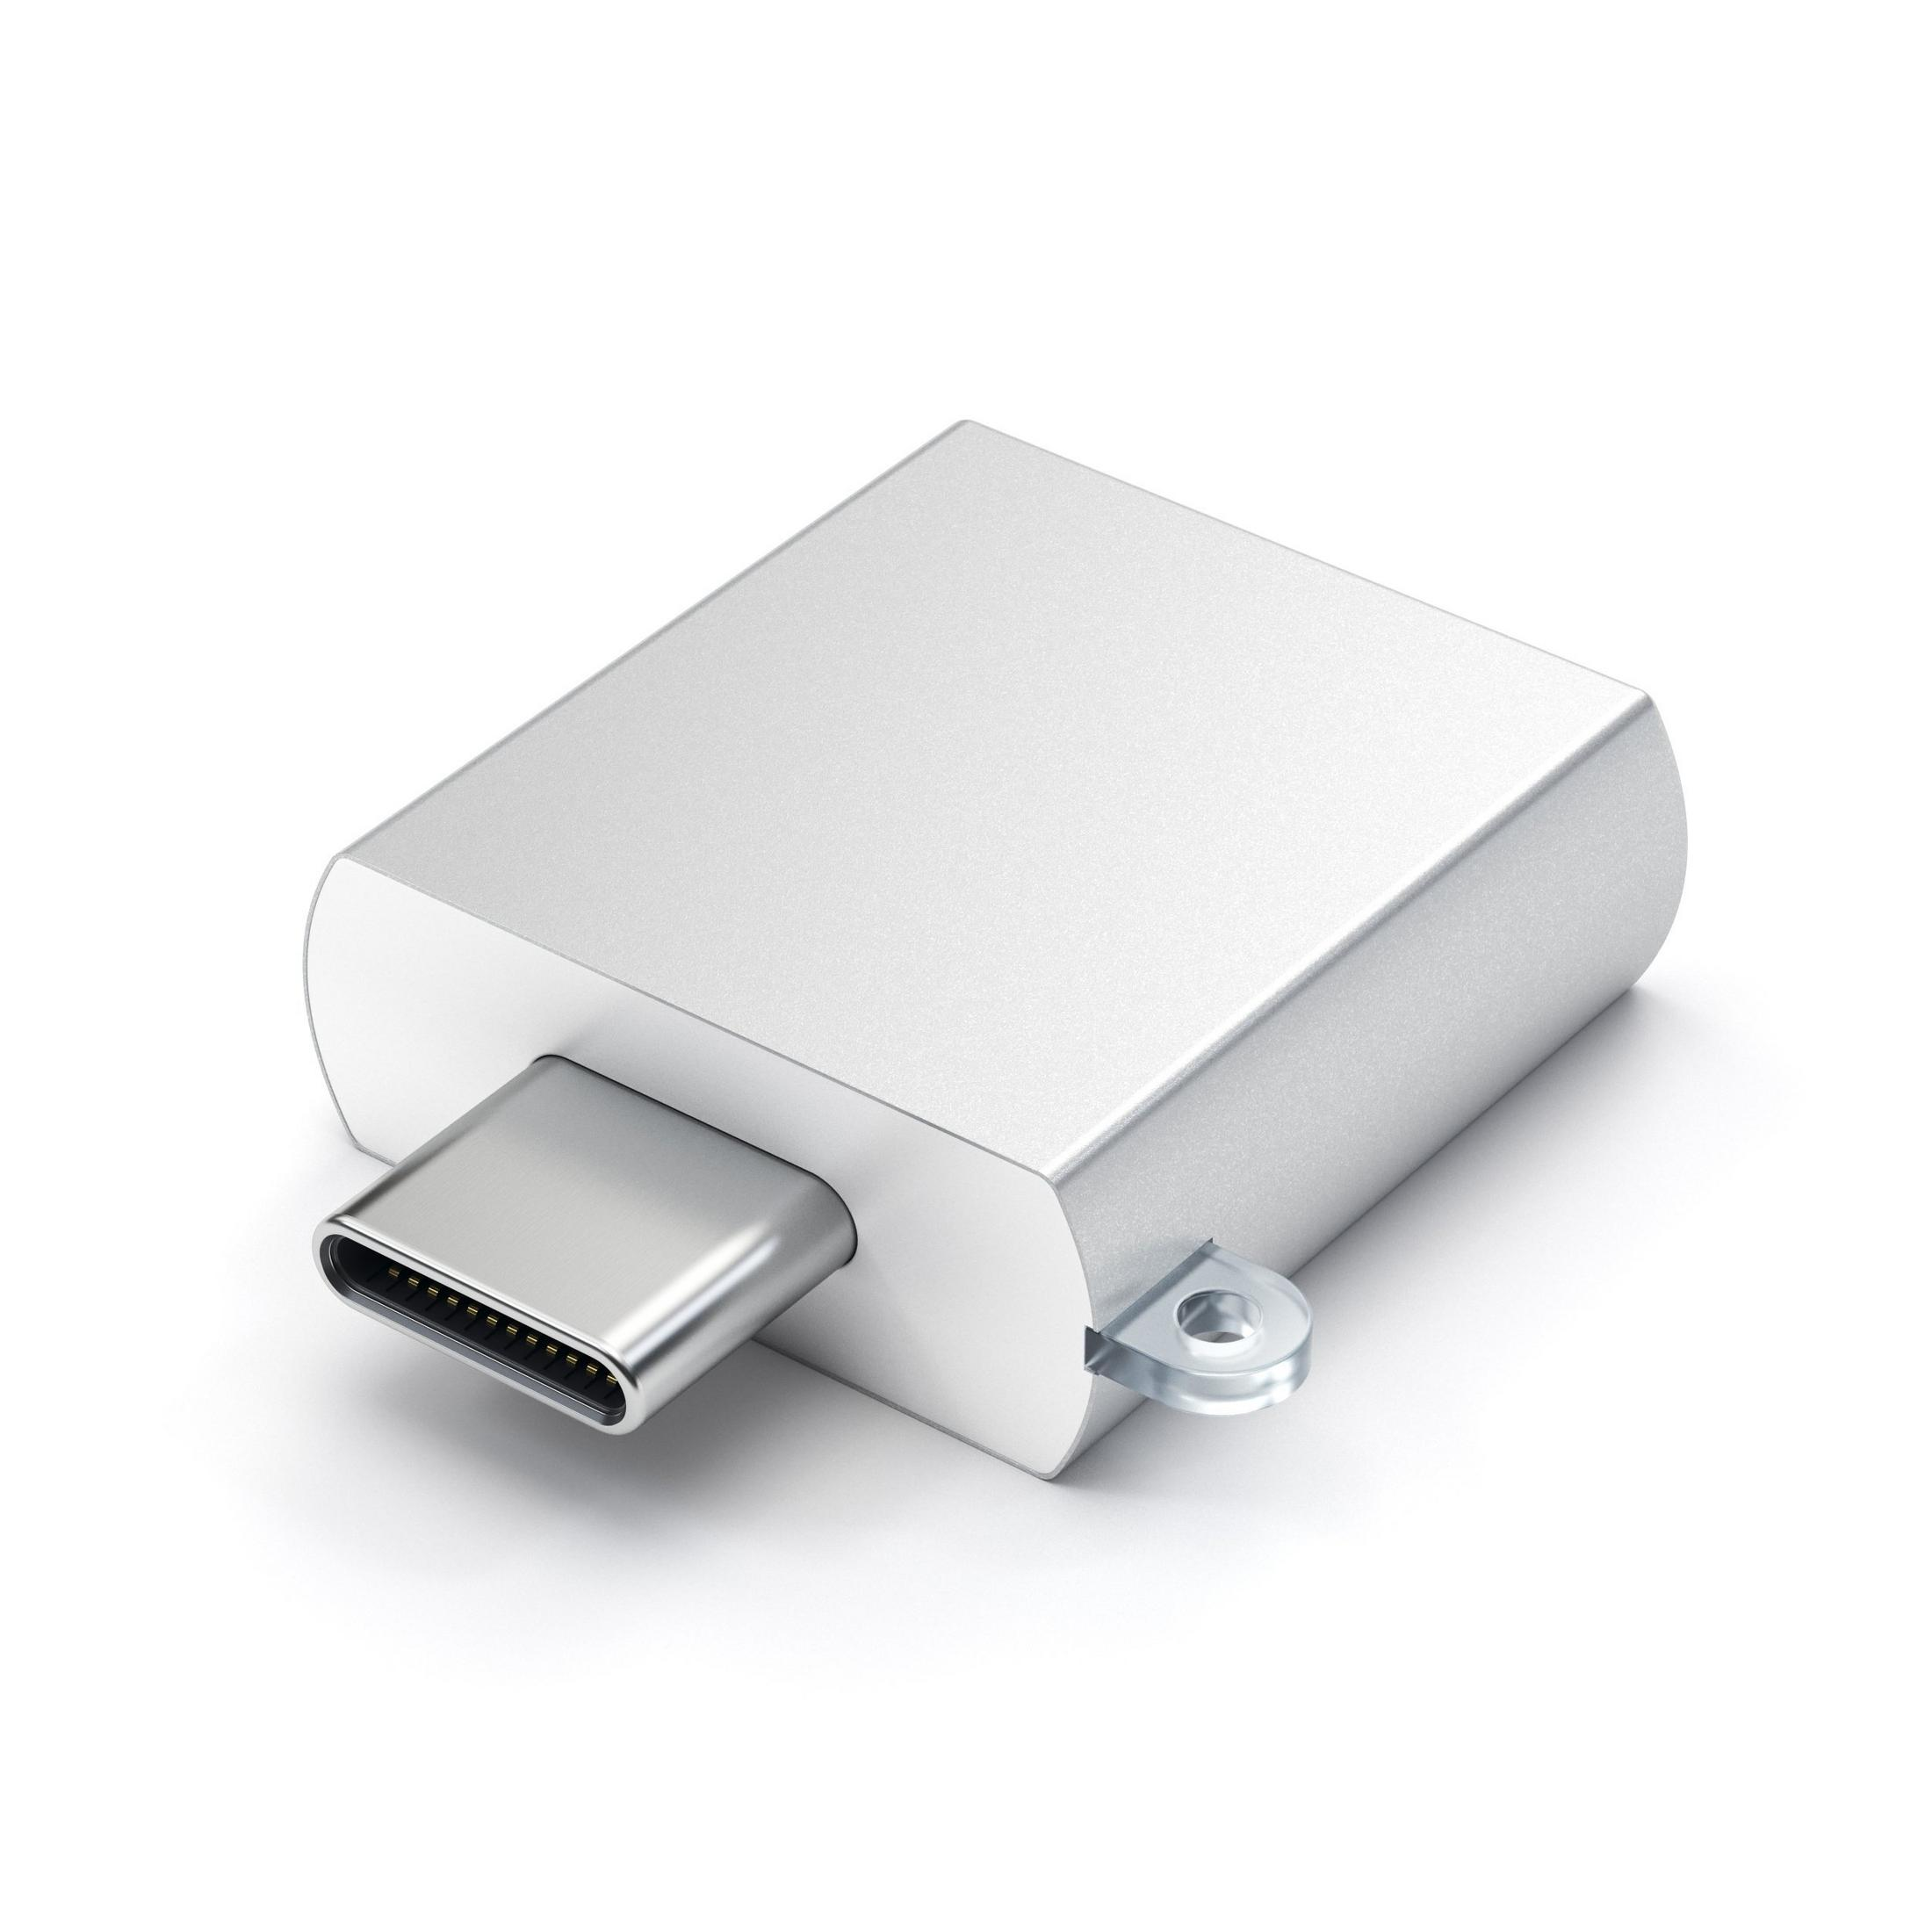 SATECHI SILBER Adapter, 179965 TYPE-C ADAPTER Silber USB